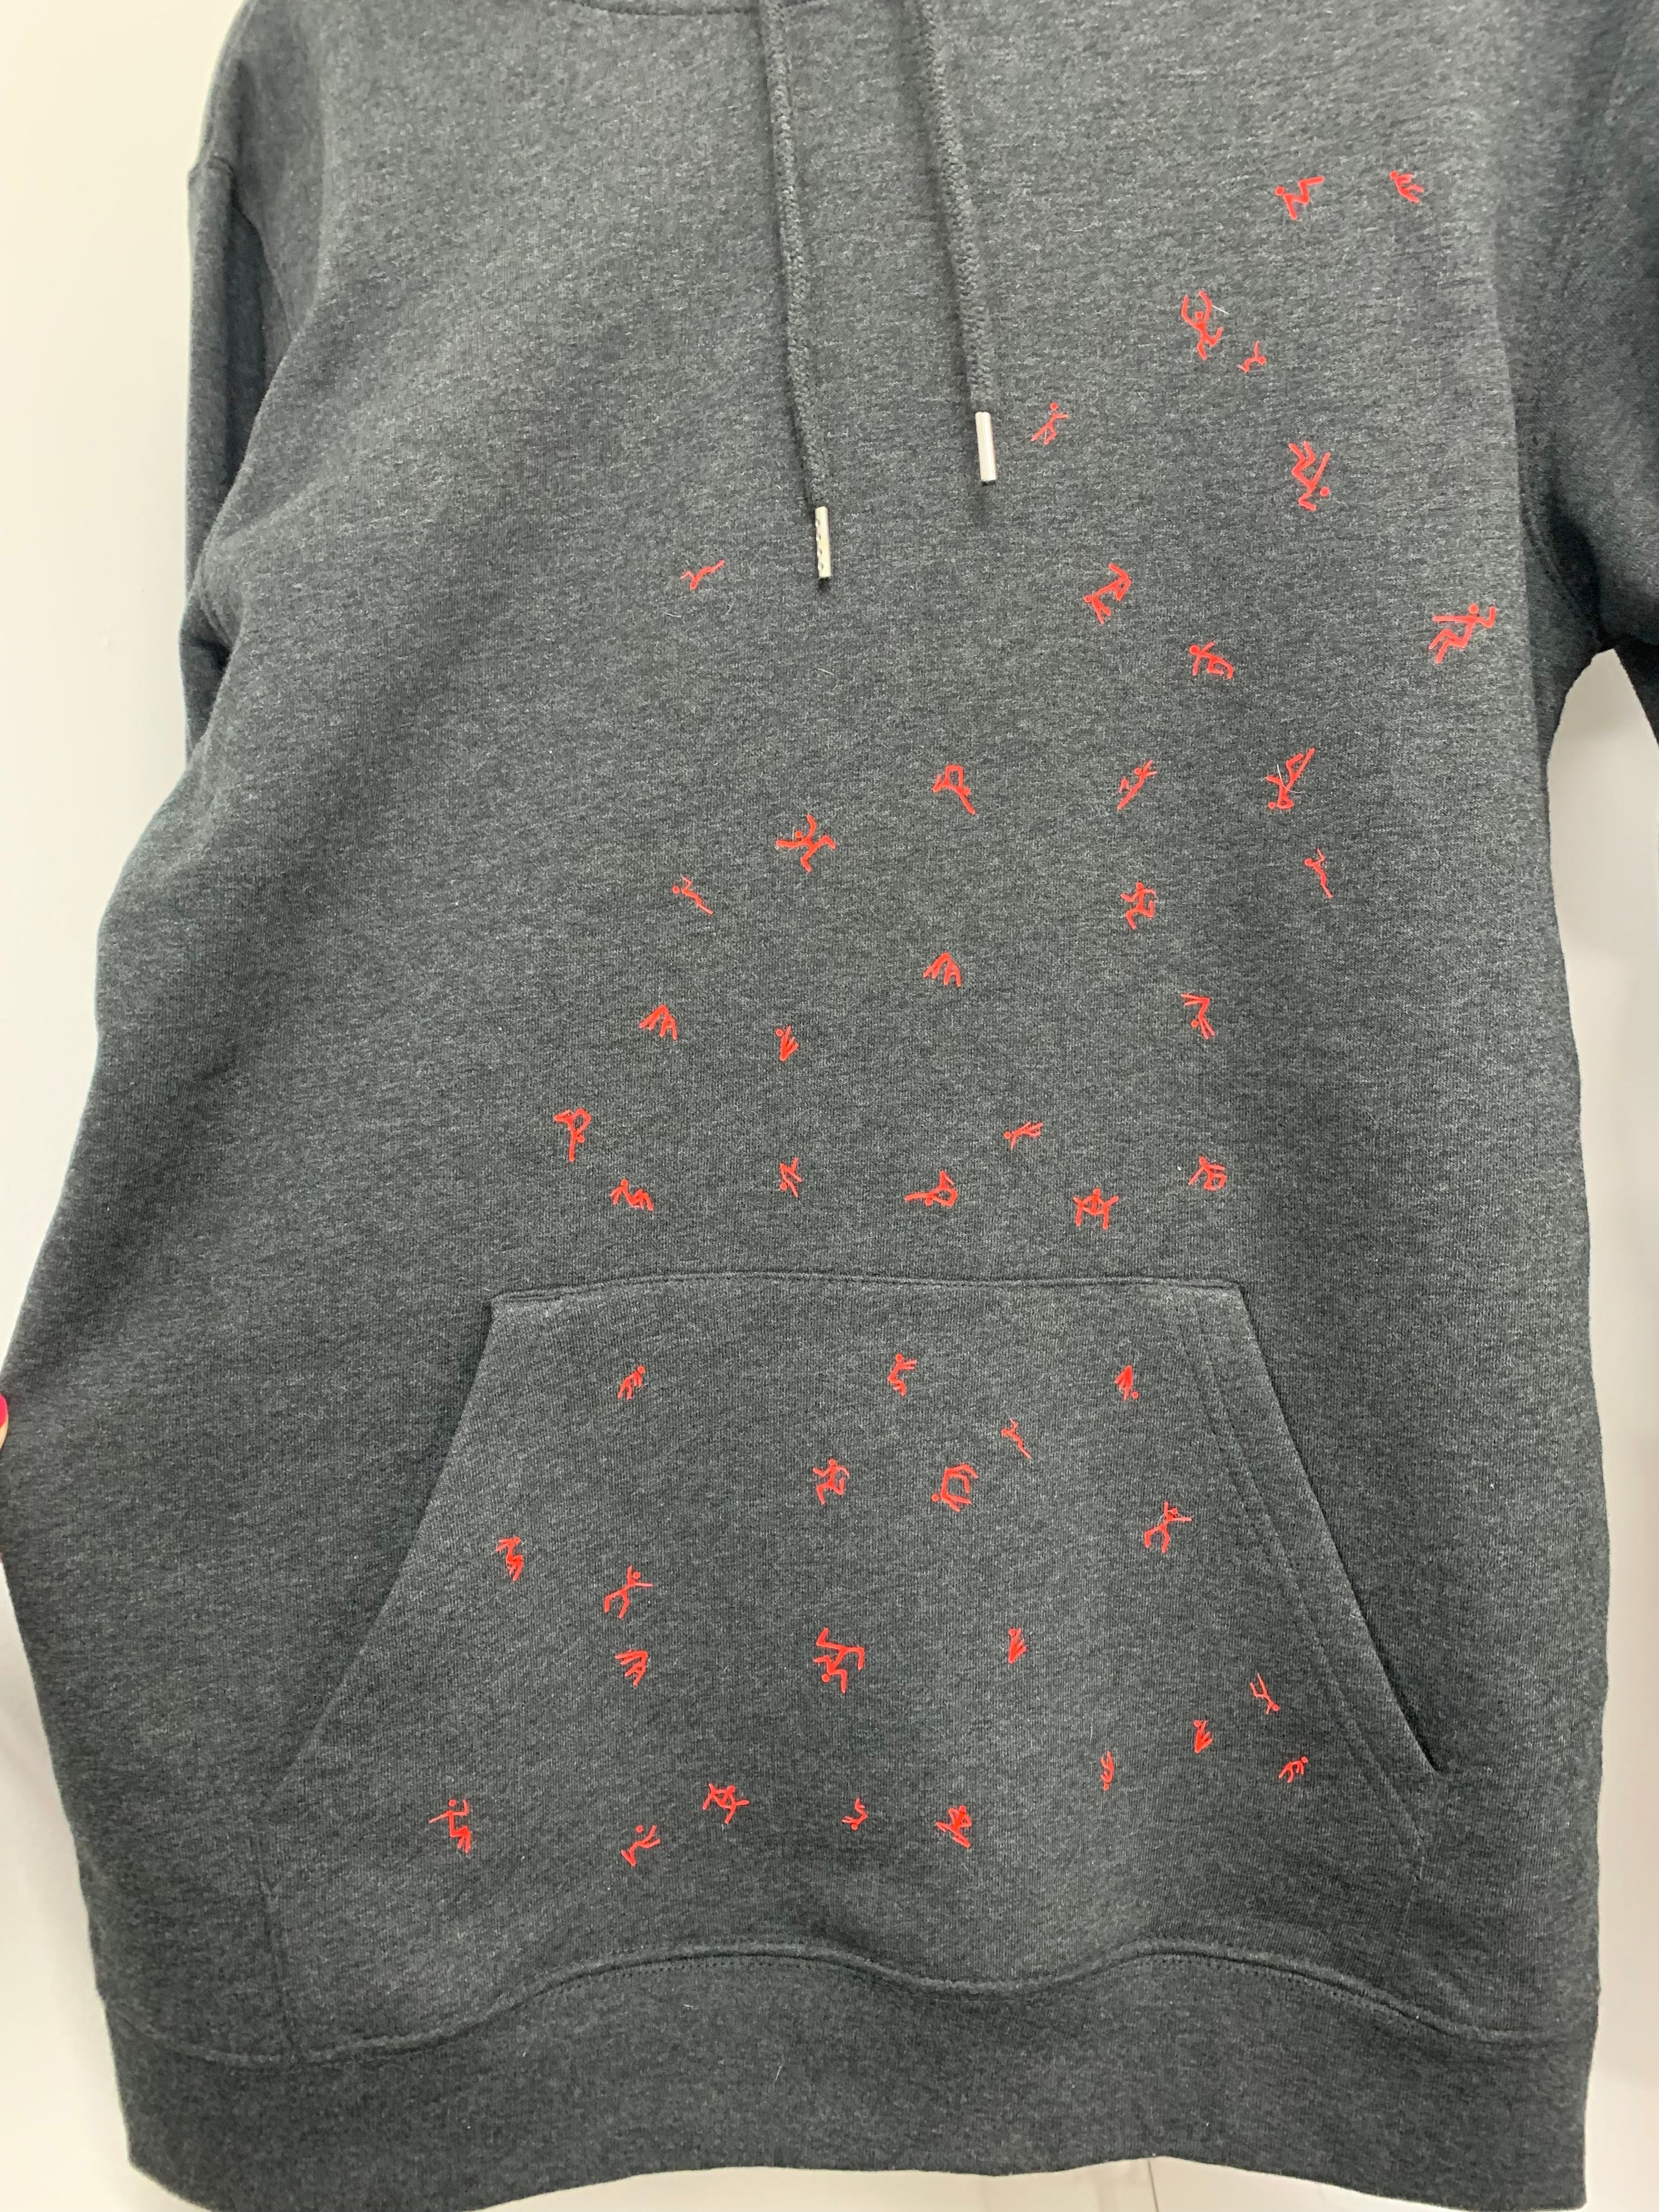 Unisex Hoodie with red stickmen, ready to ship